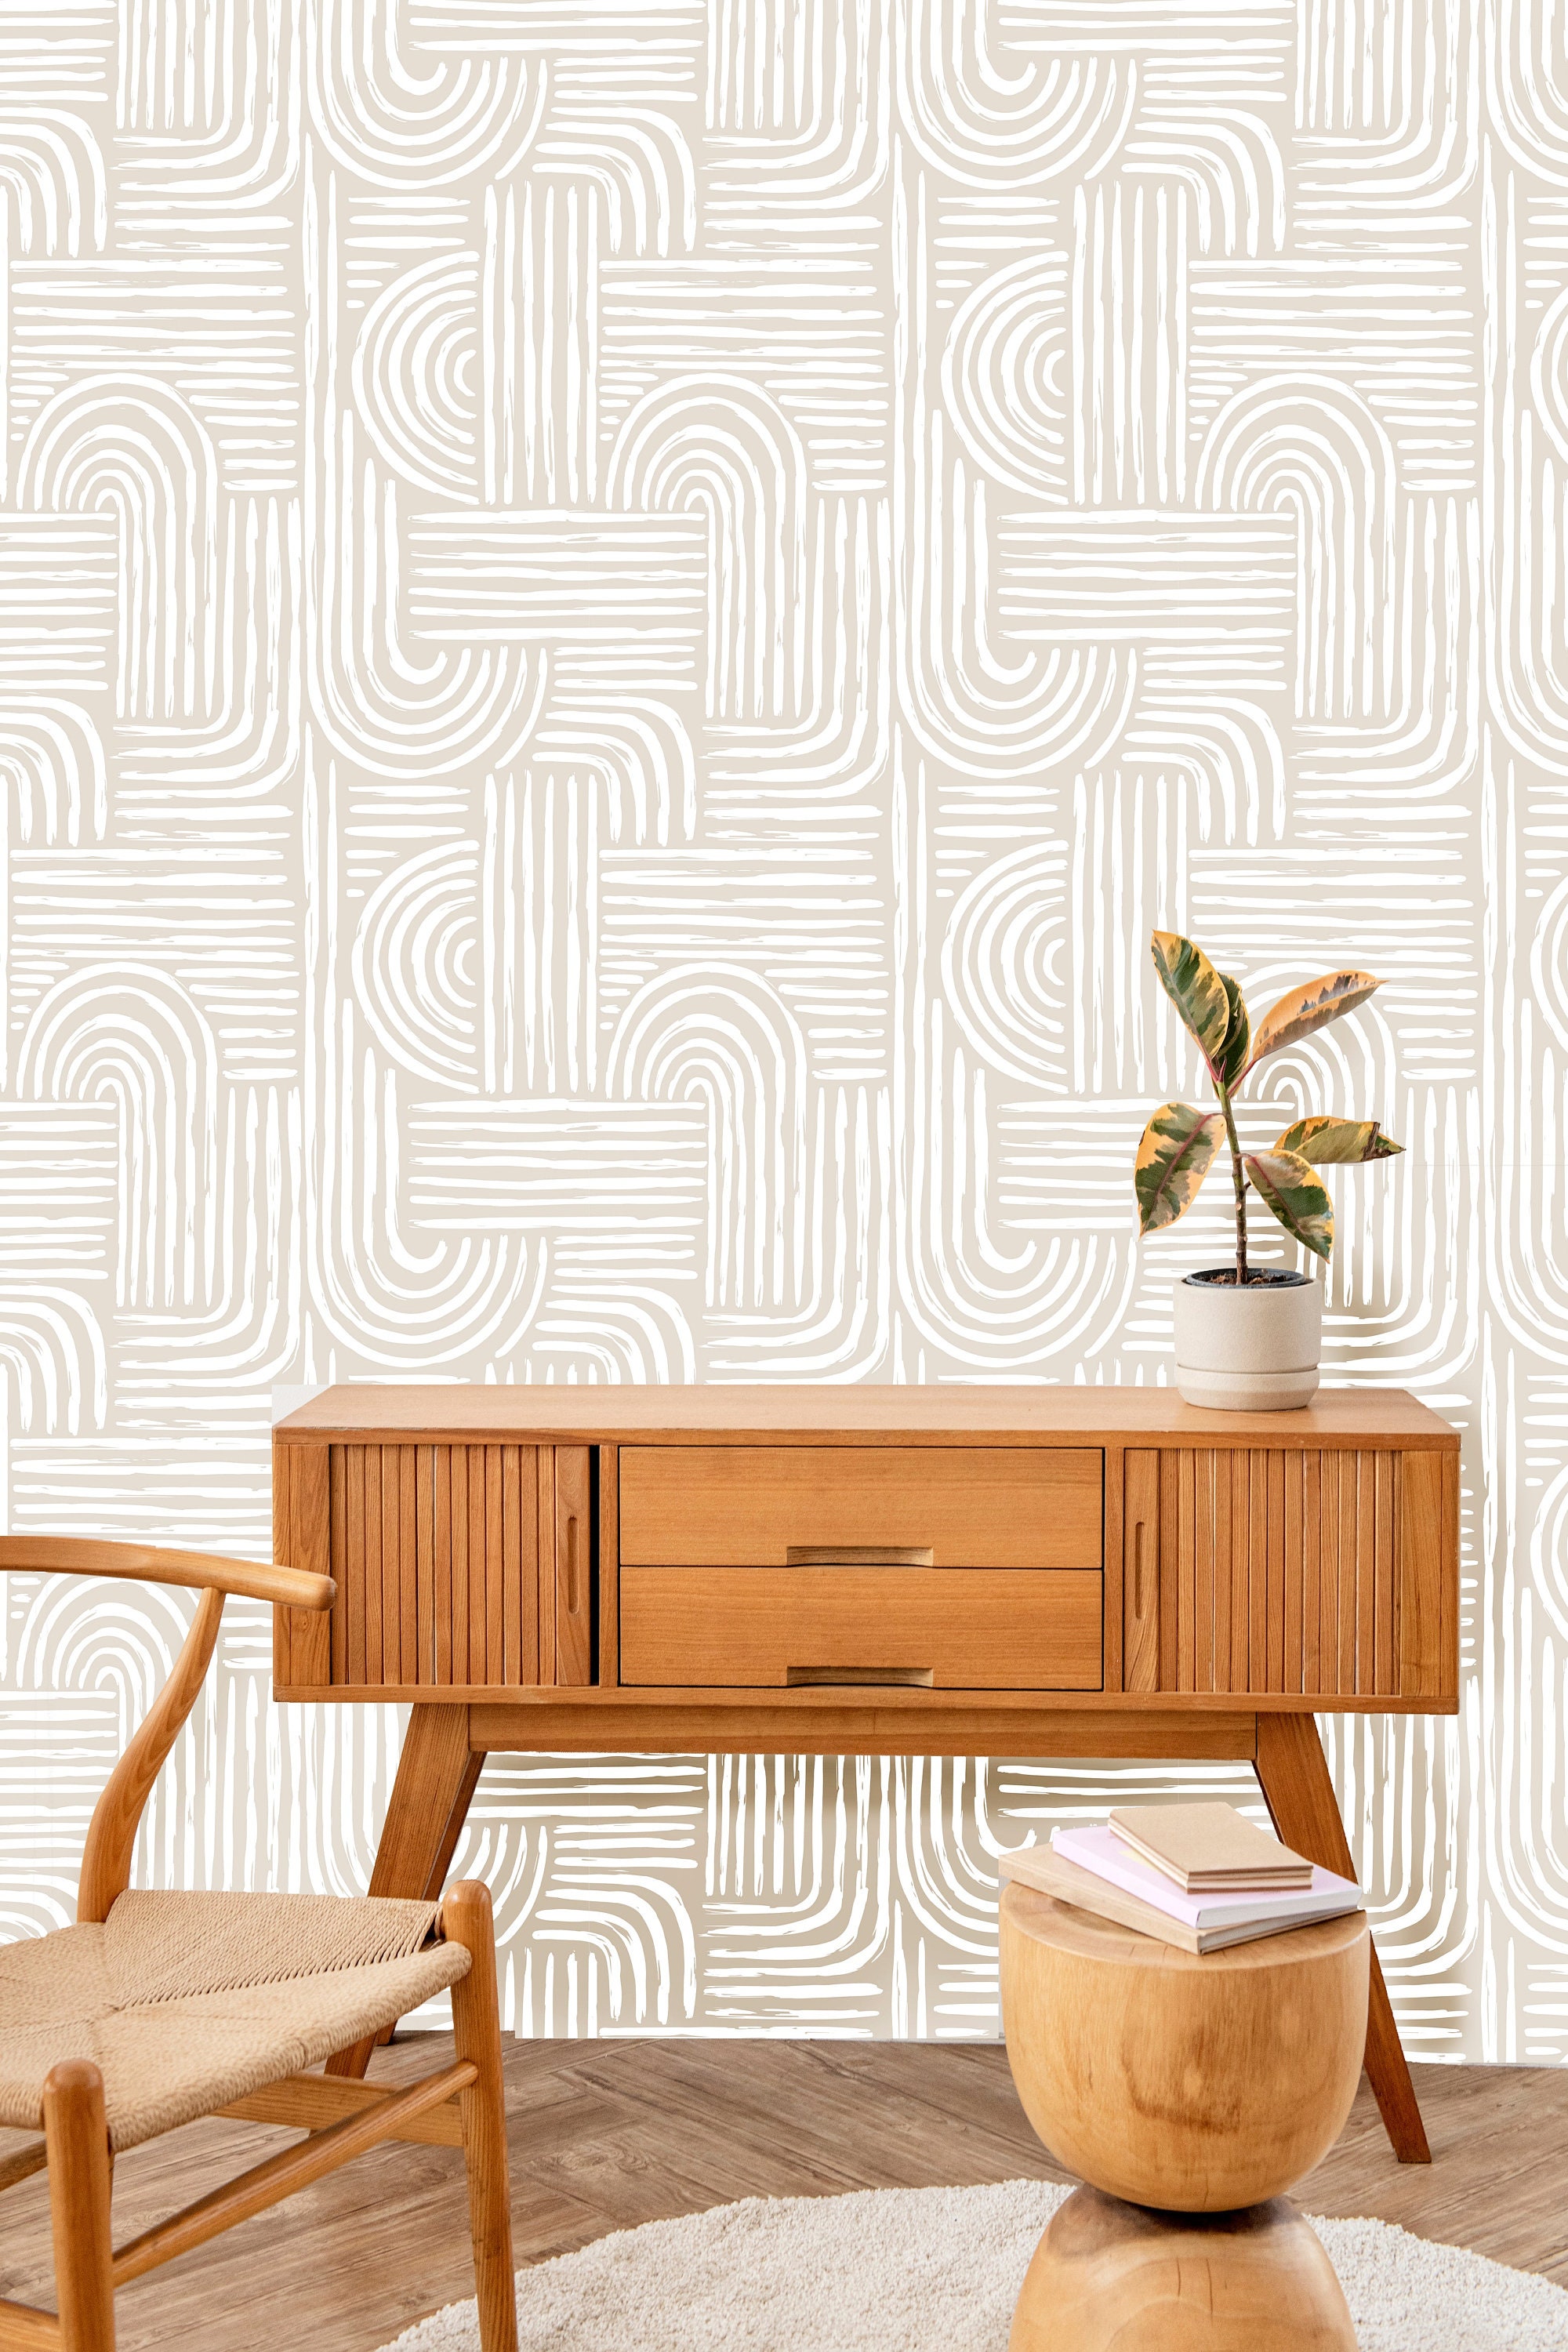 Magnolia Home by Joanna Gaines Neutral Renewed Floral Non Woven Preium  Paper Peel and Stick Matte Wallpaper Approximately 342 sq ft PSW1495RL   The Home Depot